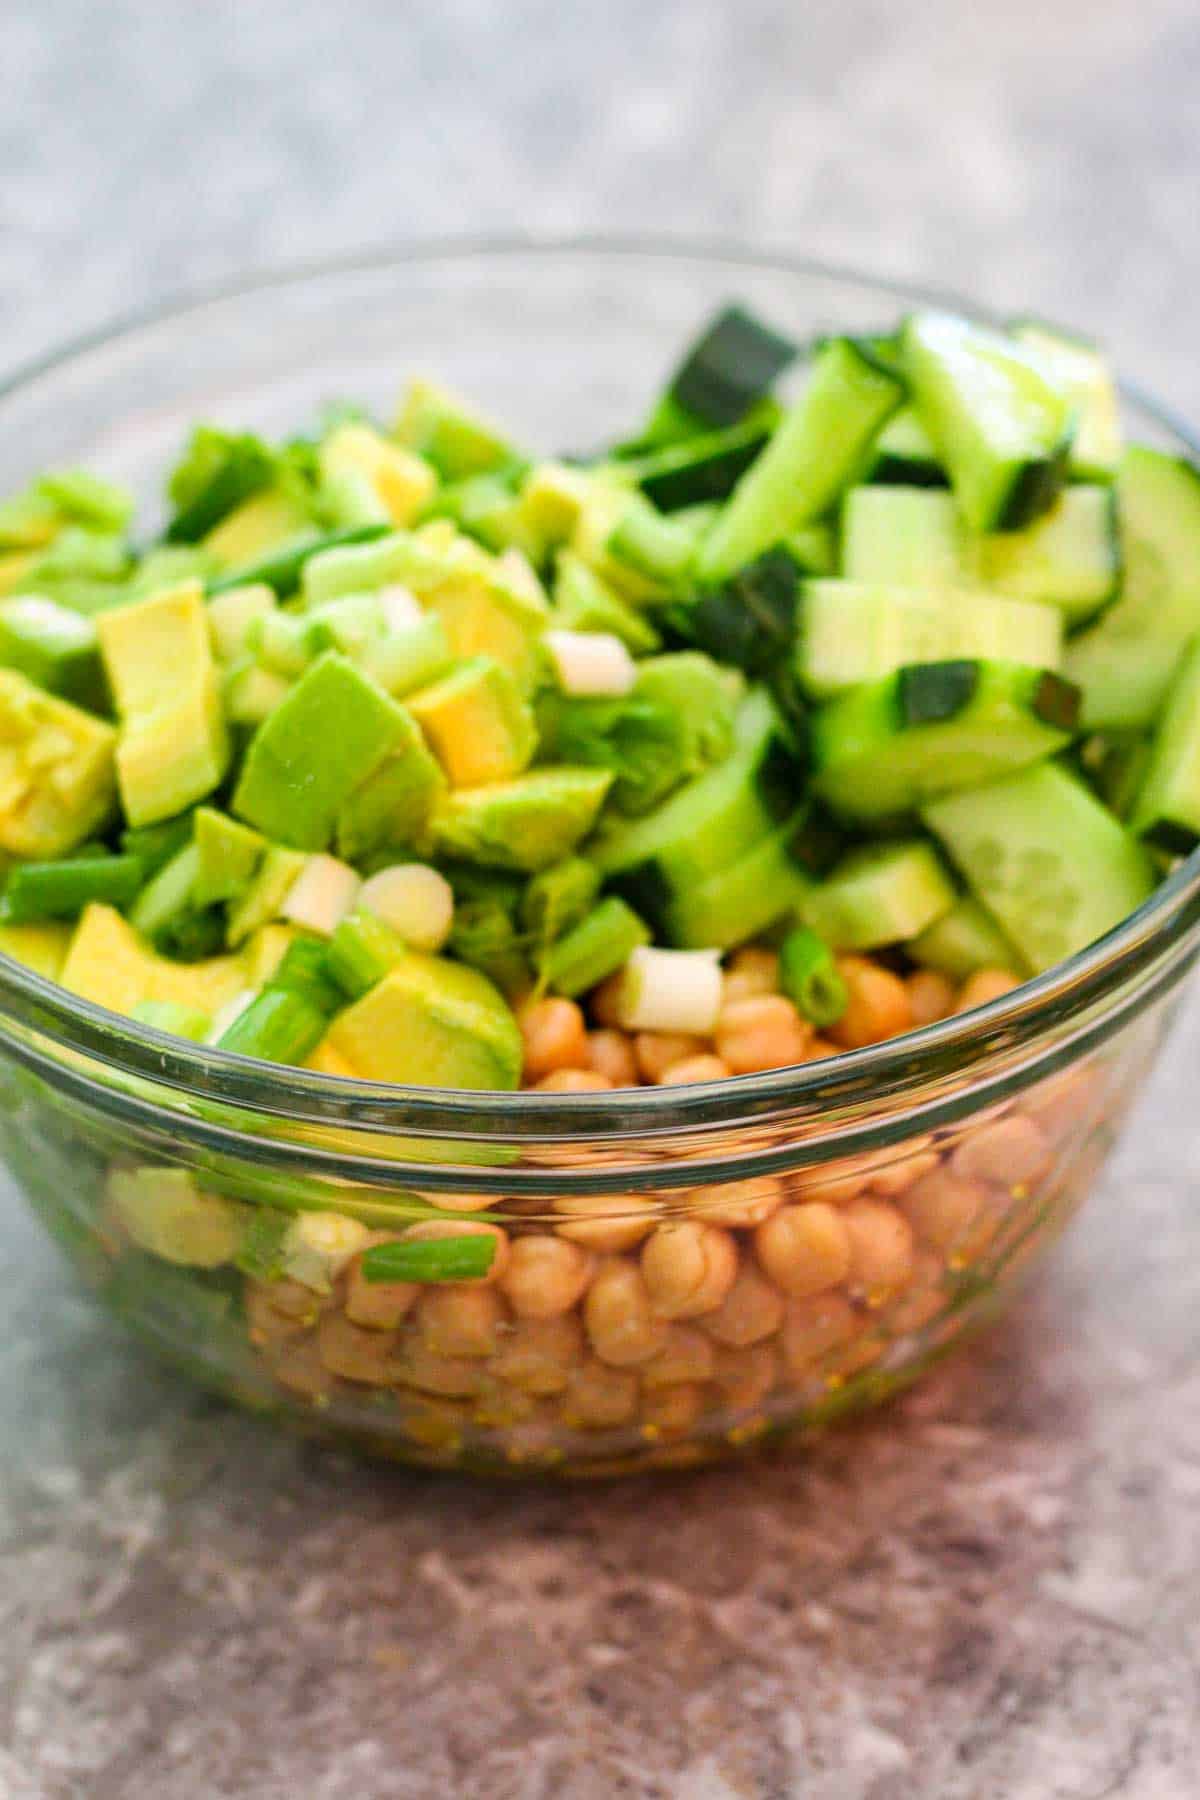 A medium glass bowl showing chickpeas, cucumbers, avocados, green onions etc ready to get tosssed.